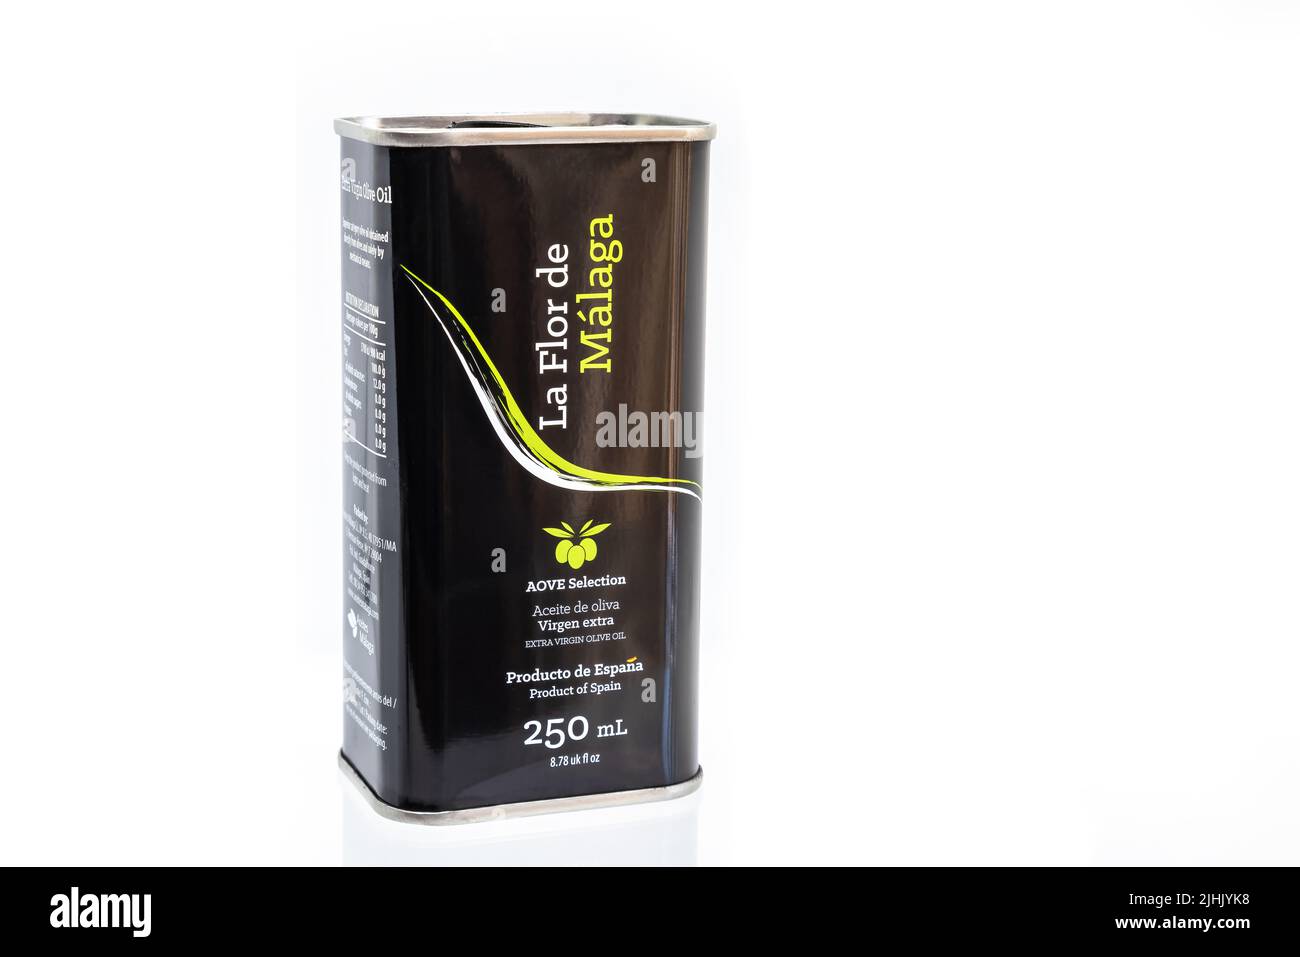 Huelva, Spain - July 19, 2022: A can of extra virgin olive oil, great selection, of the La Flor de Malaga brand Stock Photo